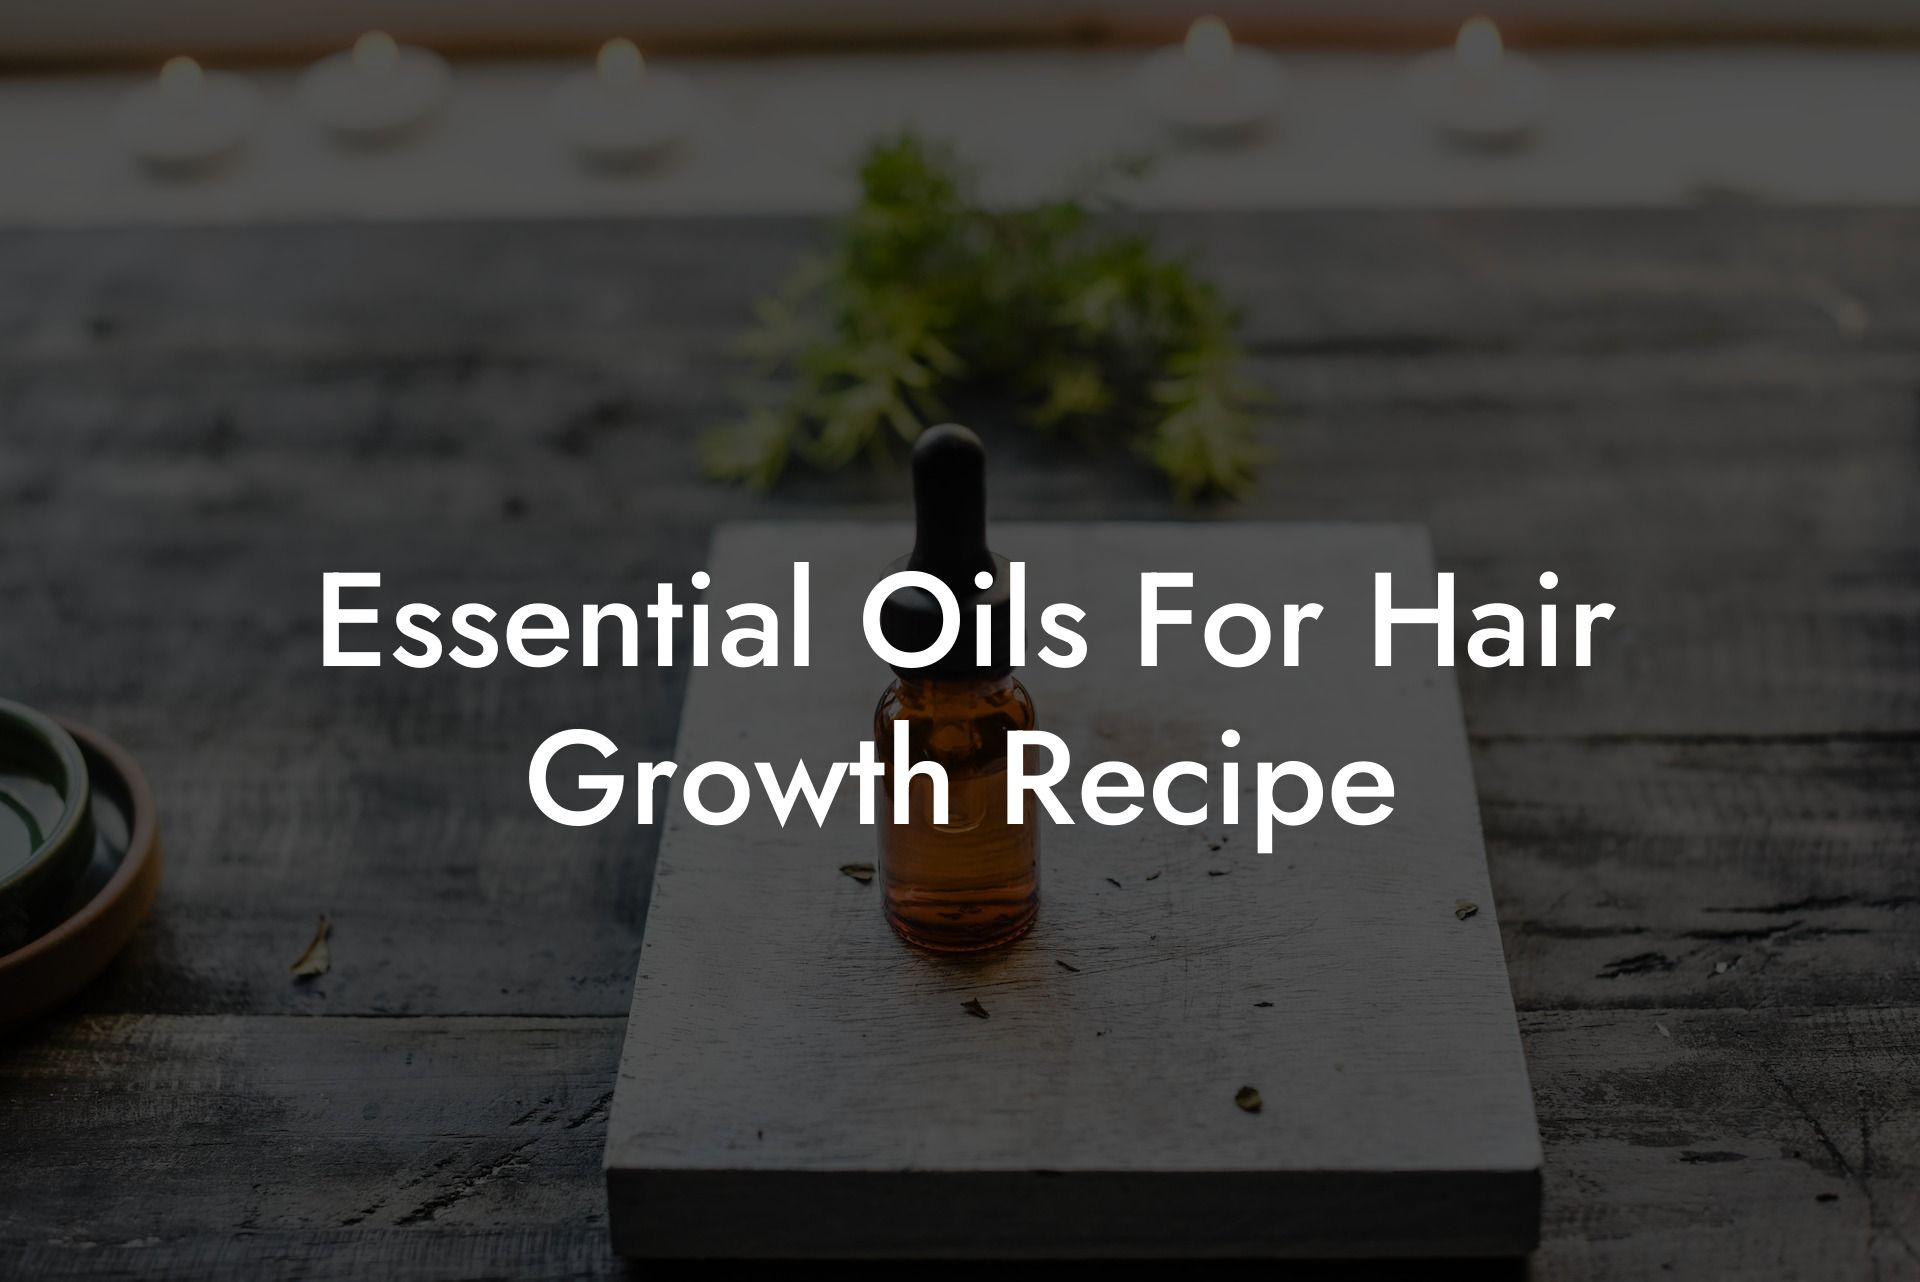 Essential Oils For Hair Growth Recipe